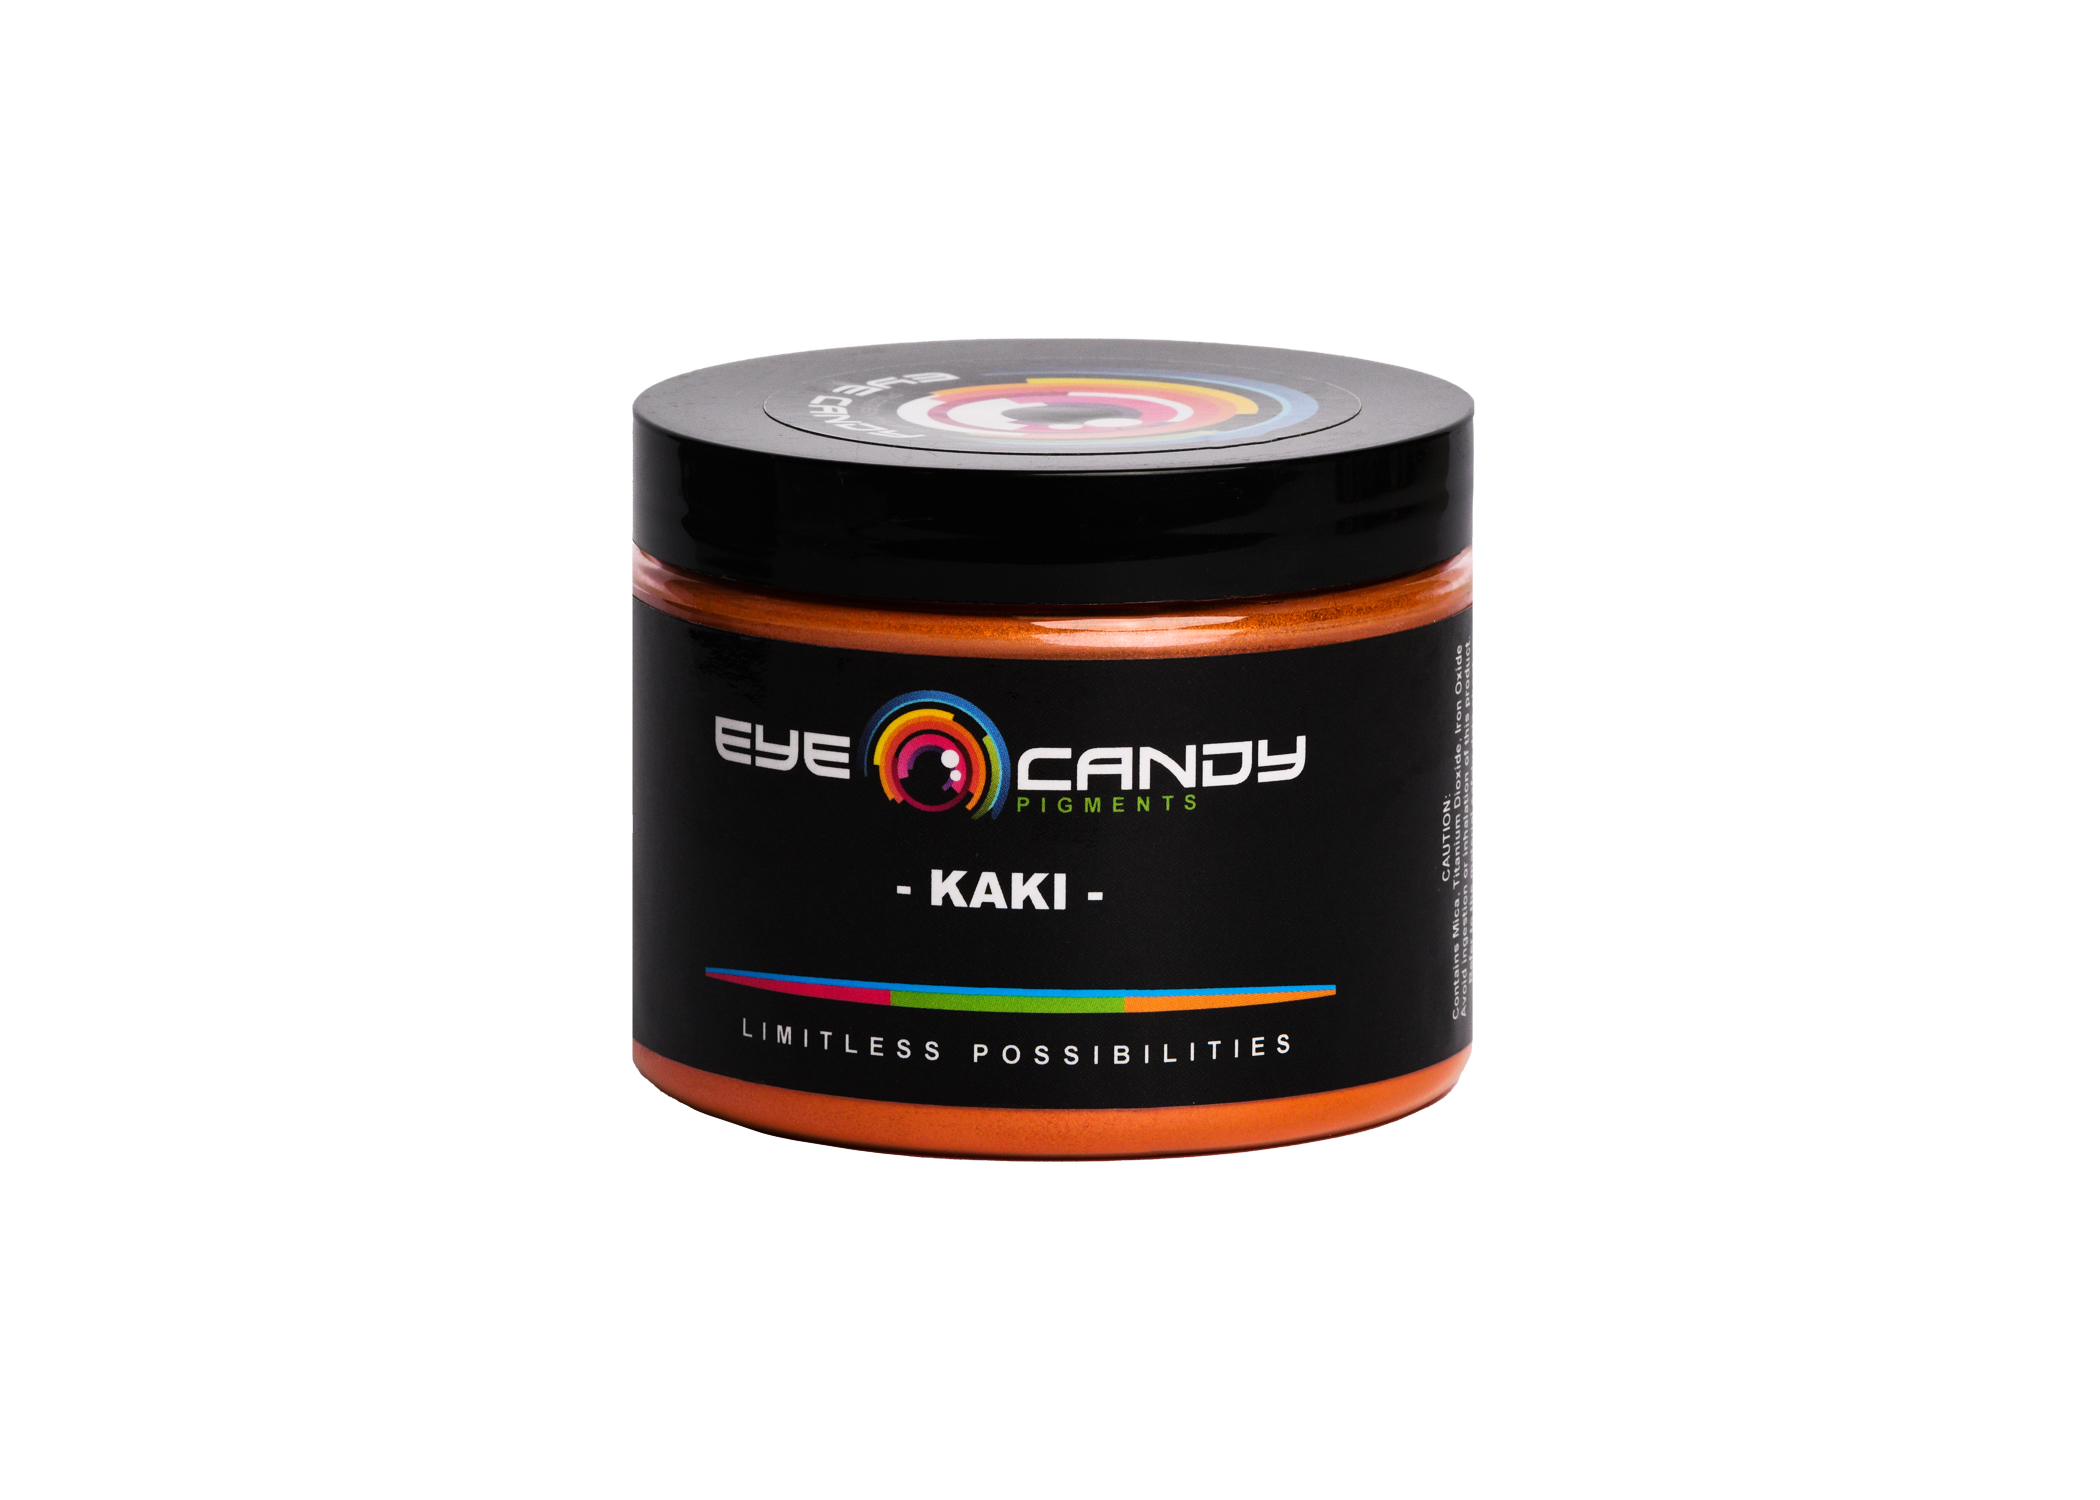 Eye Candy Mica Powder Pigment for epoxy resin in Kaki. (4oz container)